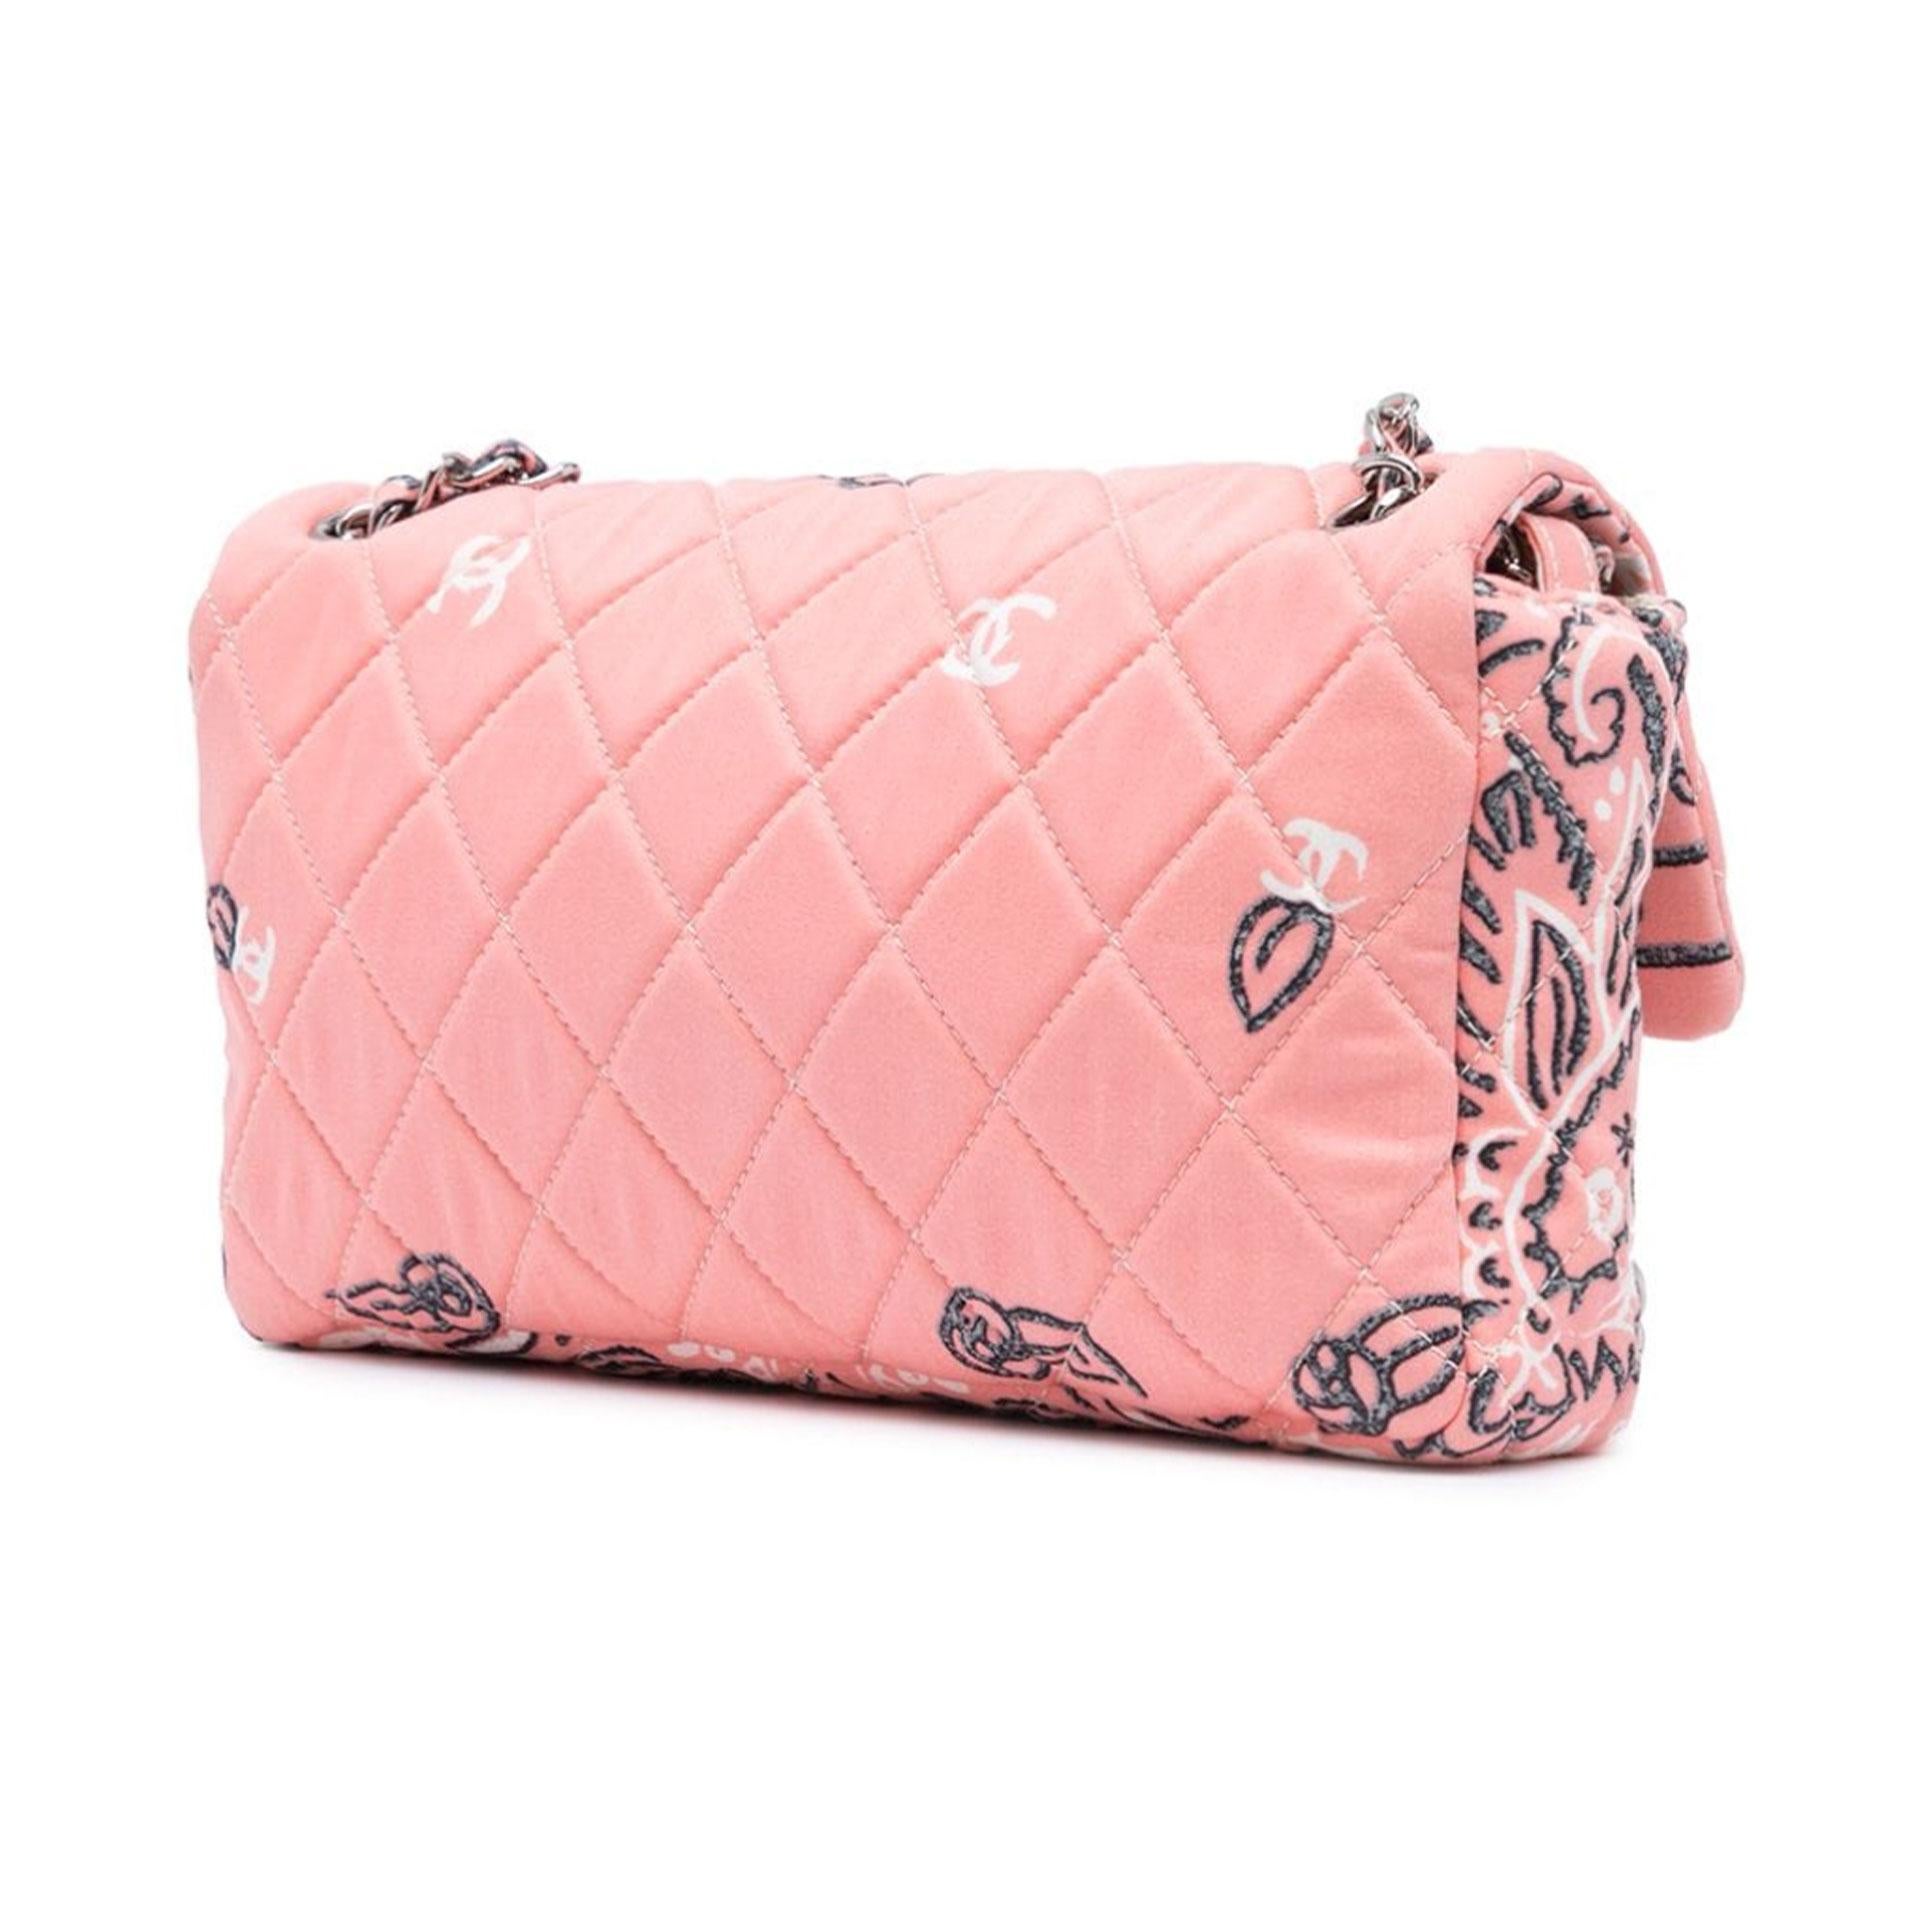 Chanel Pink Peach Bandana Quilted Flower Print Classic Flap Shoulder Bag

circa 2008
pink/peach
canvas
floral print
diamond quilting
signature interlocking CC logo
silver-tone hardware
fabric and chain-link shoulder strap
internal zip-fastening